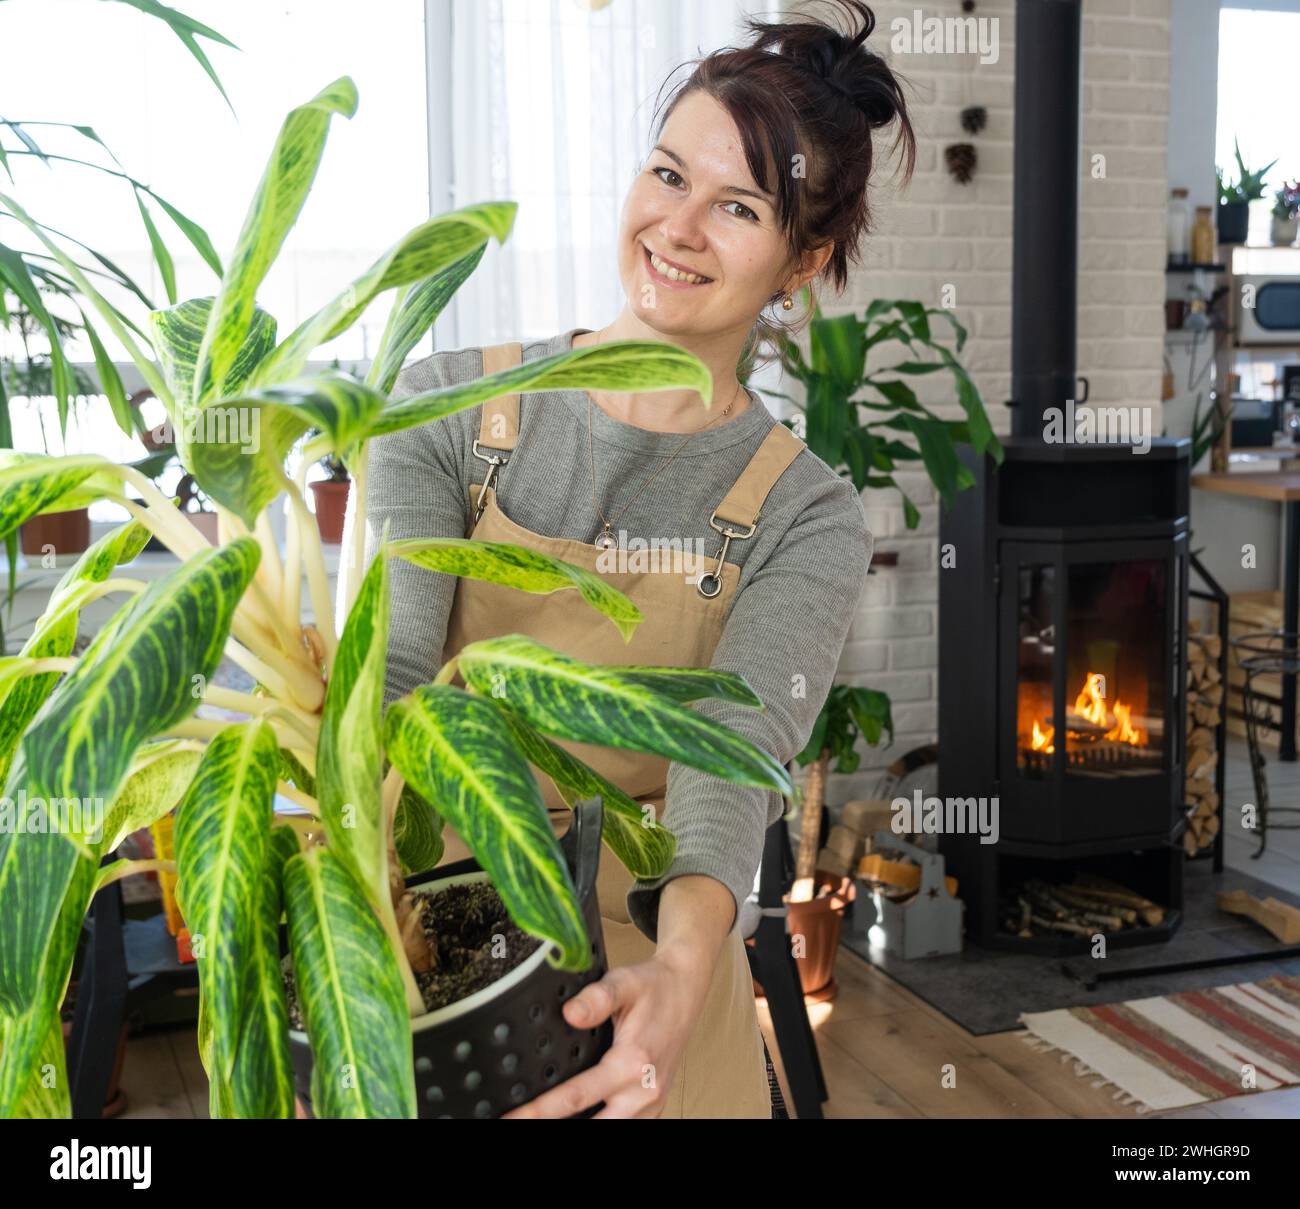 A happy woman in a green house with a potted plant in her hands smiles, takes care of a flower. The interior of a cozy eco-frien Stock Photo